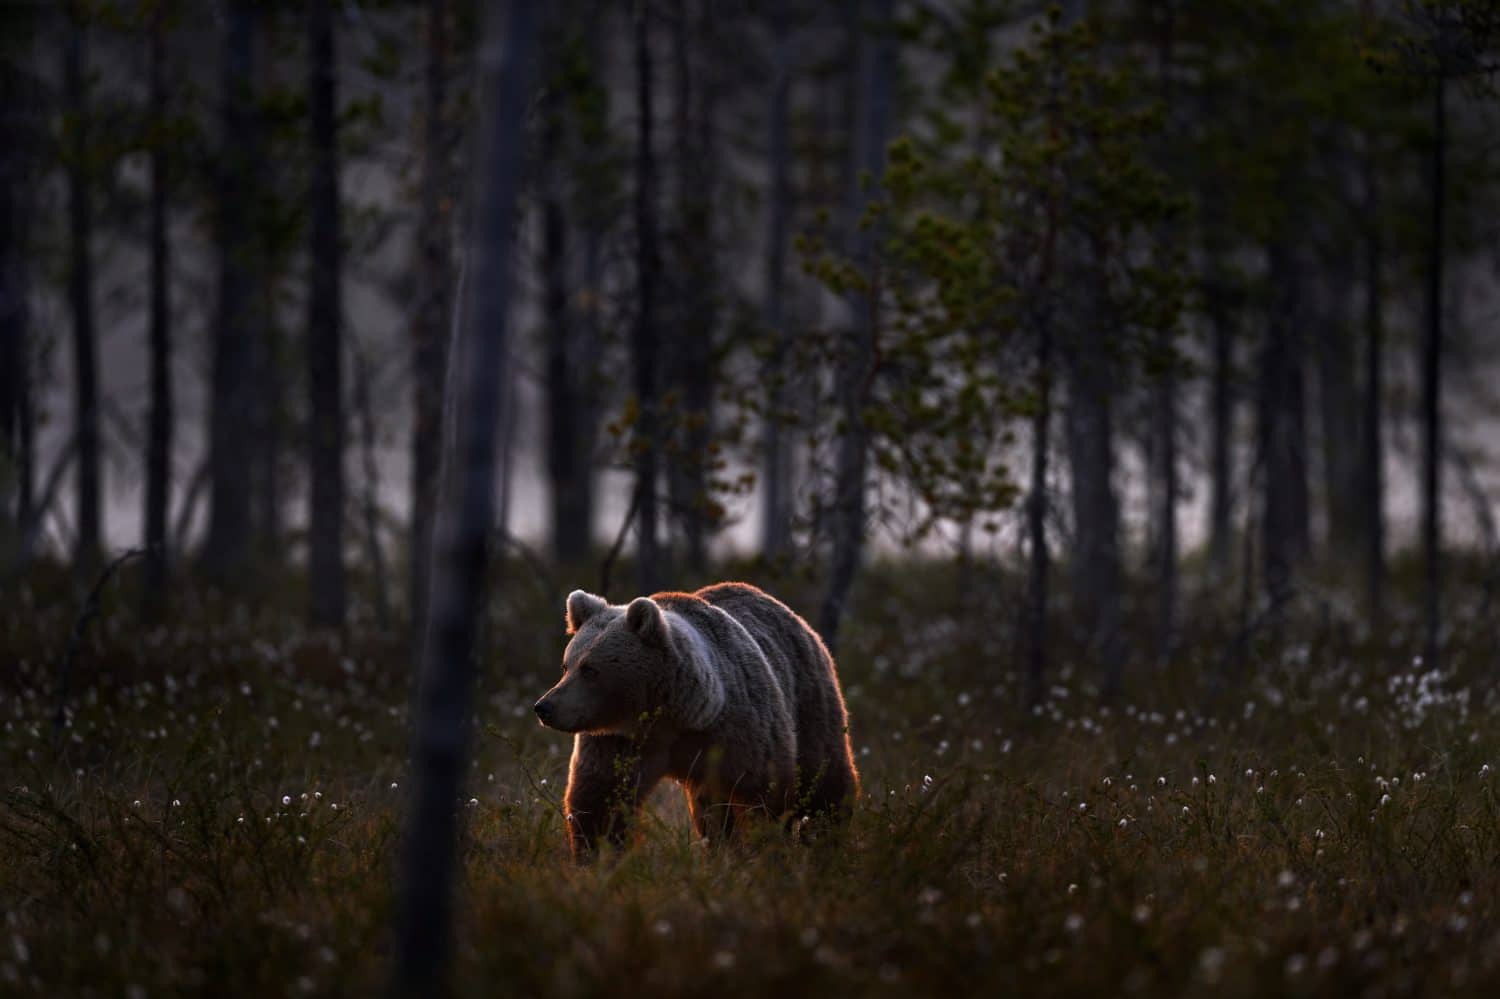 Night in taiga Bear hidden in yellow forest. Autumn trees with bear. Beautiful brown bear walking around lake, fall colours. Big danger animal in habitat. Wildlife scene from nature, Finland.